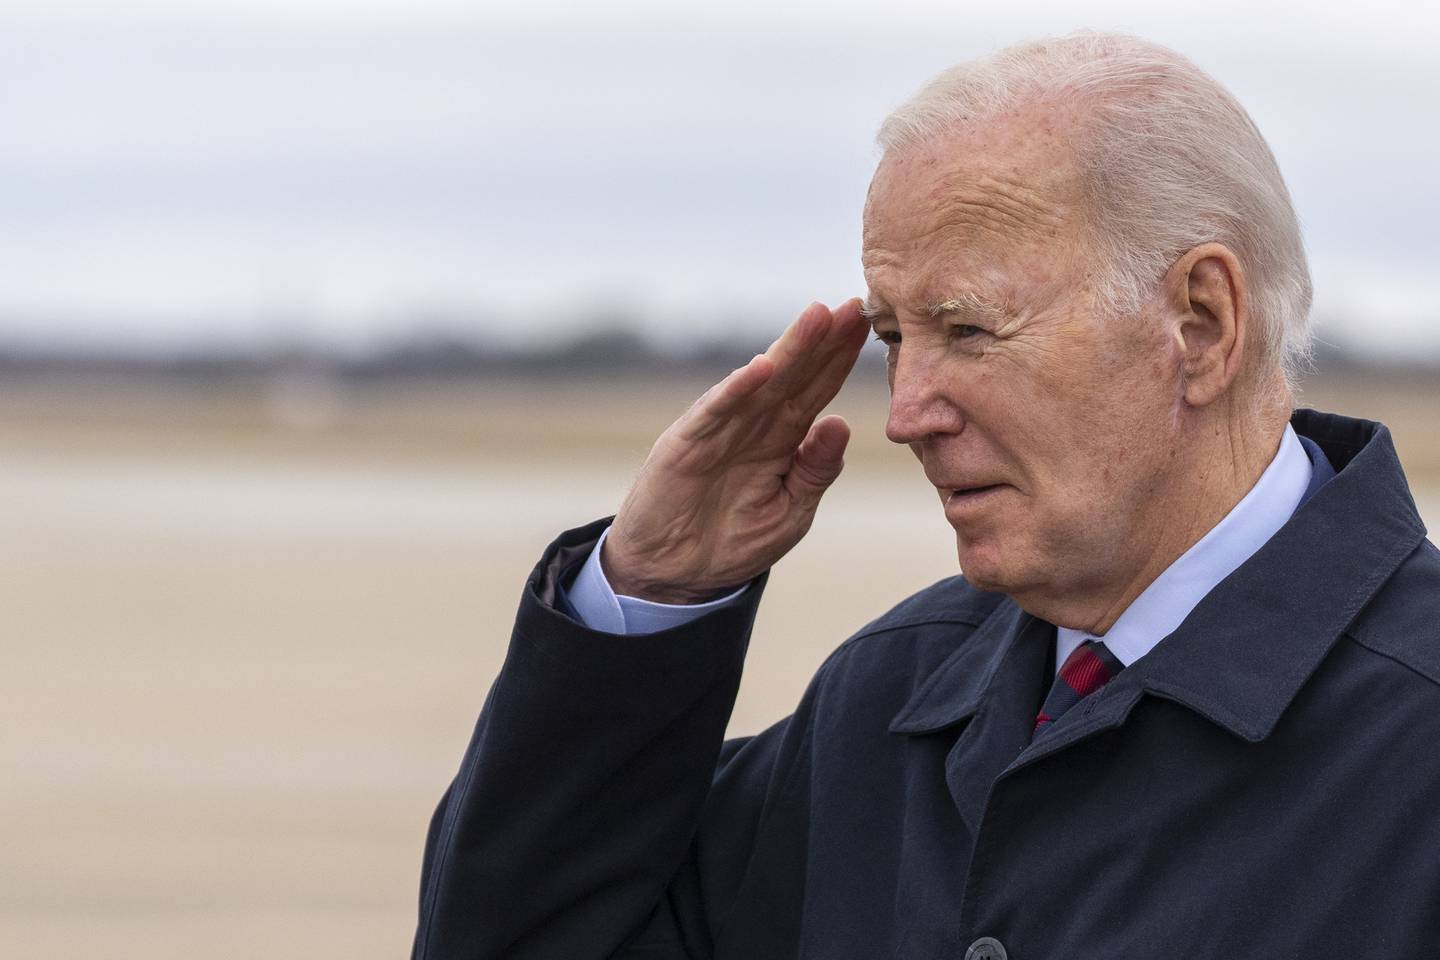 President Joe Biden salutes as he steps off Air Force One upon arrival, Tuesday, March 5, 2024, at Andrews Air Force Base, Md. Biden is returning from a trip to Camp David. (AP Photo/Alex Brandon)